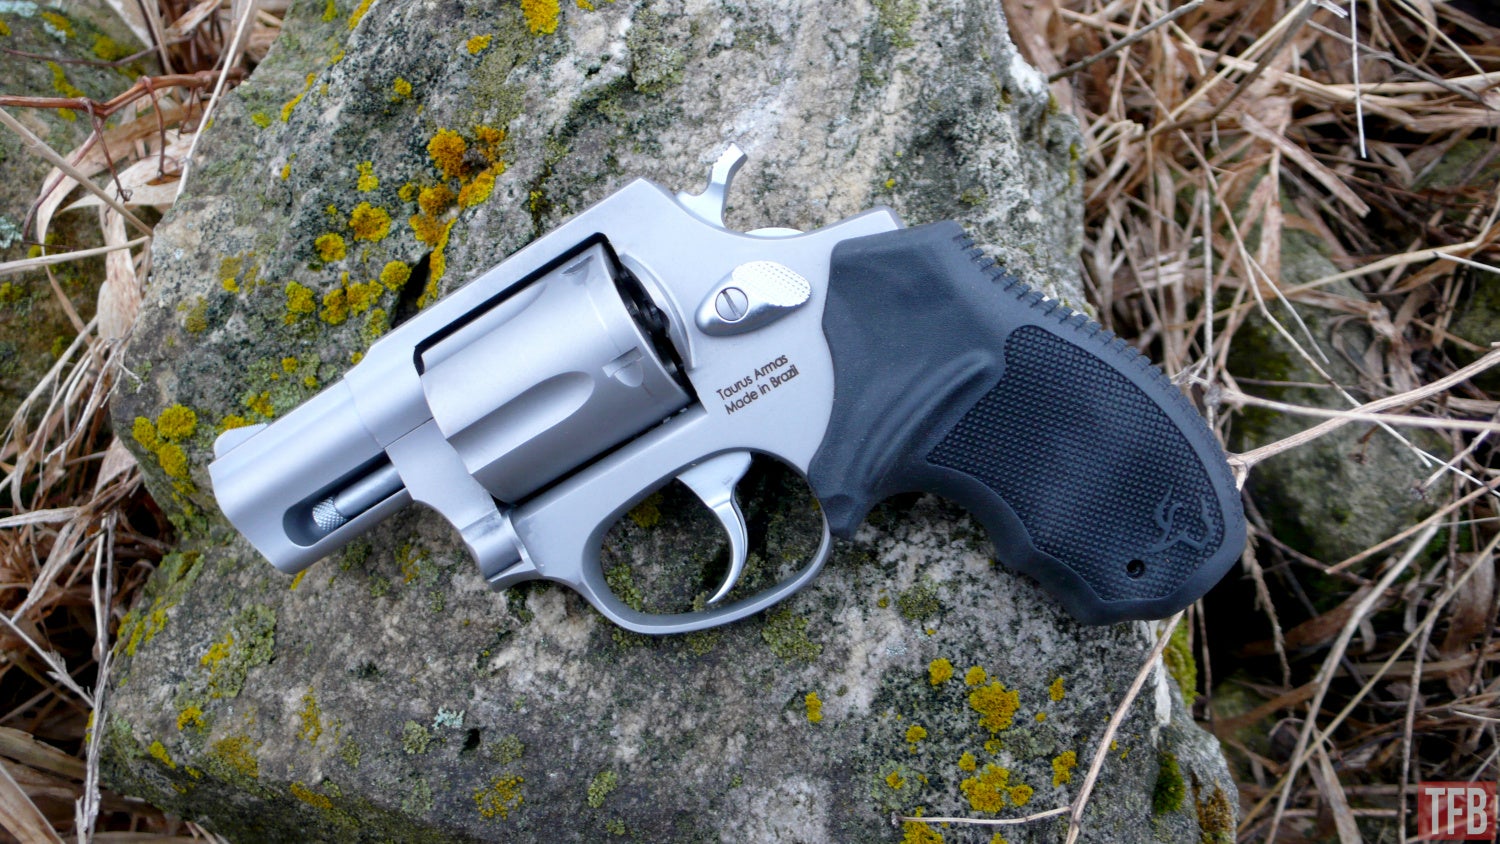 Related image of Taurus 605 A Pocket Gun That S Perfect For Self Defense 19...